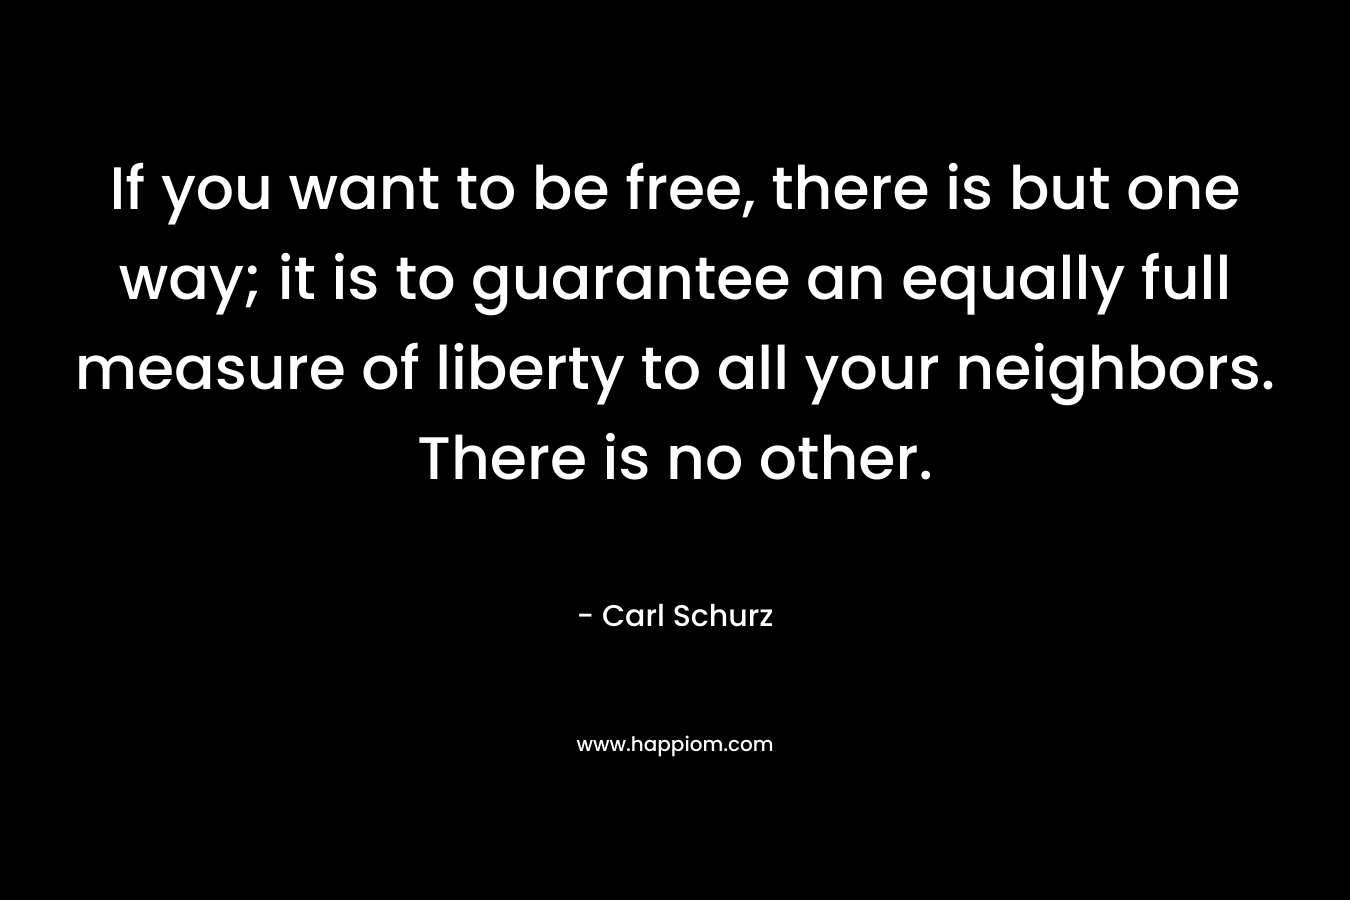 If you want to be free, there is but one way; it is to guarantee an equally full measure of liberty to all your neighbors. There is no other. – Carl Schurz